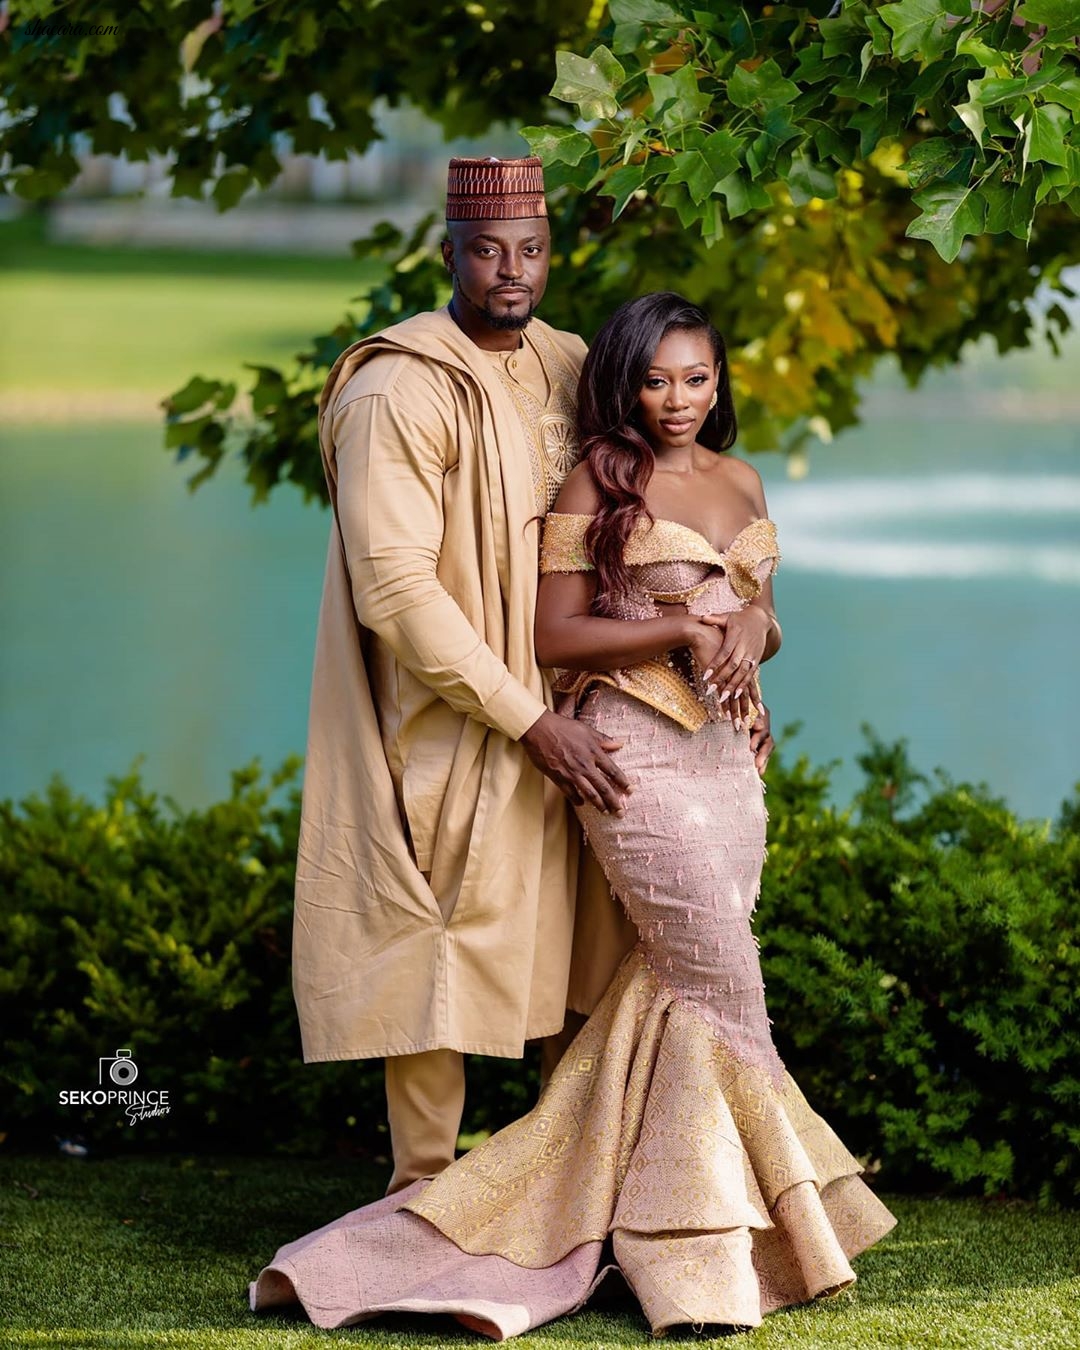 Check Out The Stunning Visuals From Vanessa Gyimah’s Enchanted Ghanaian Traditional Wedding